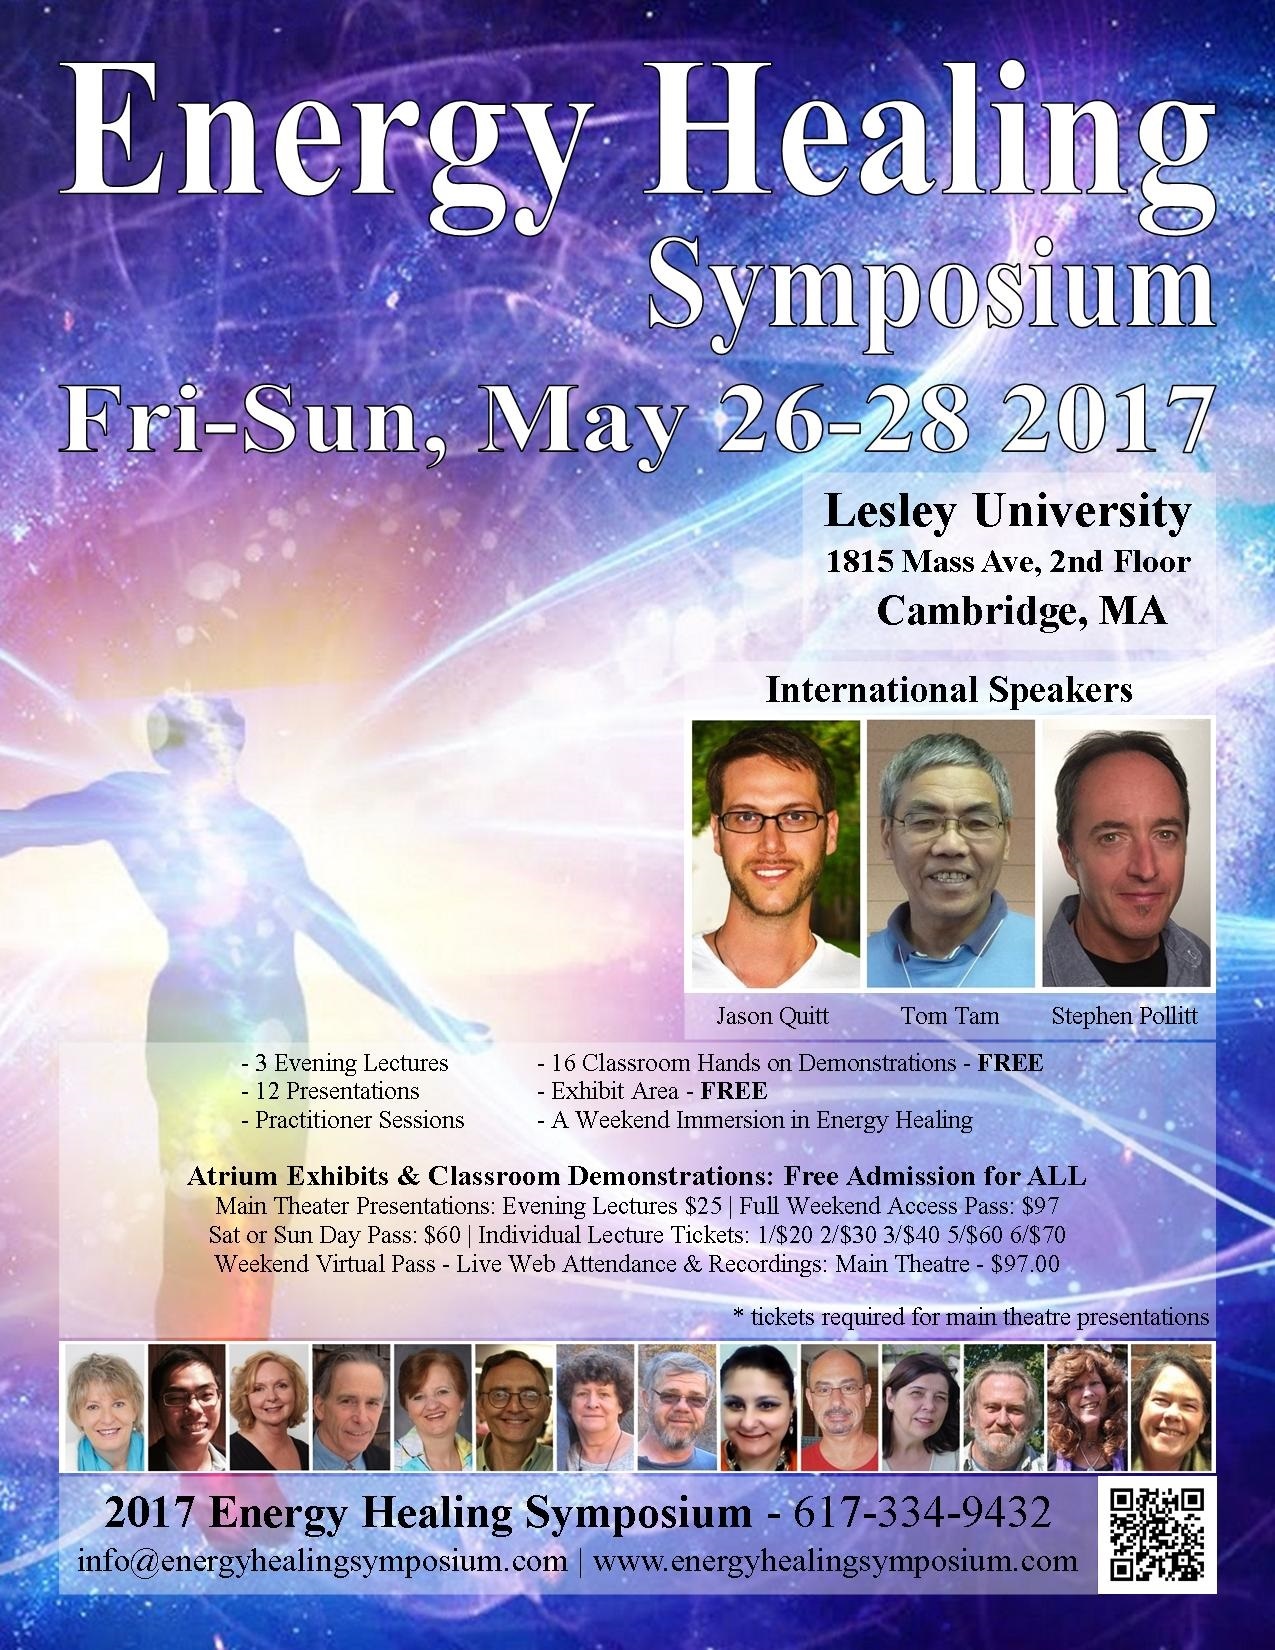 Demonstrations & Exhibits at the Energy Healing Symposium [05/26/17]